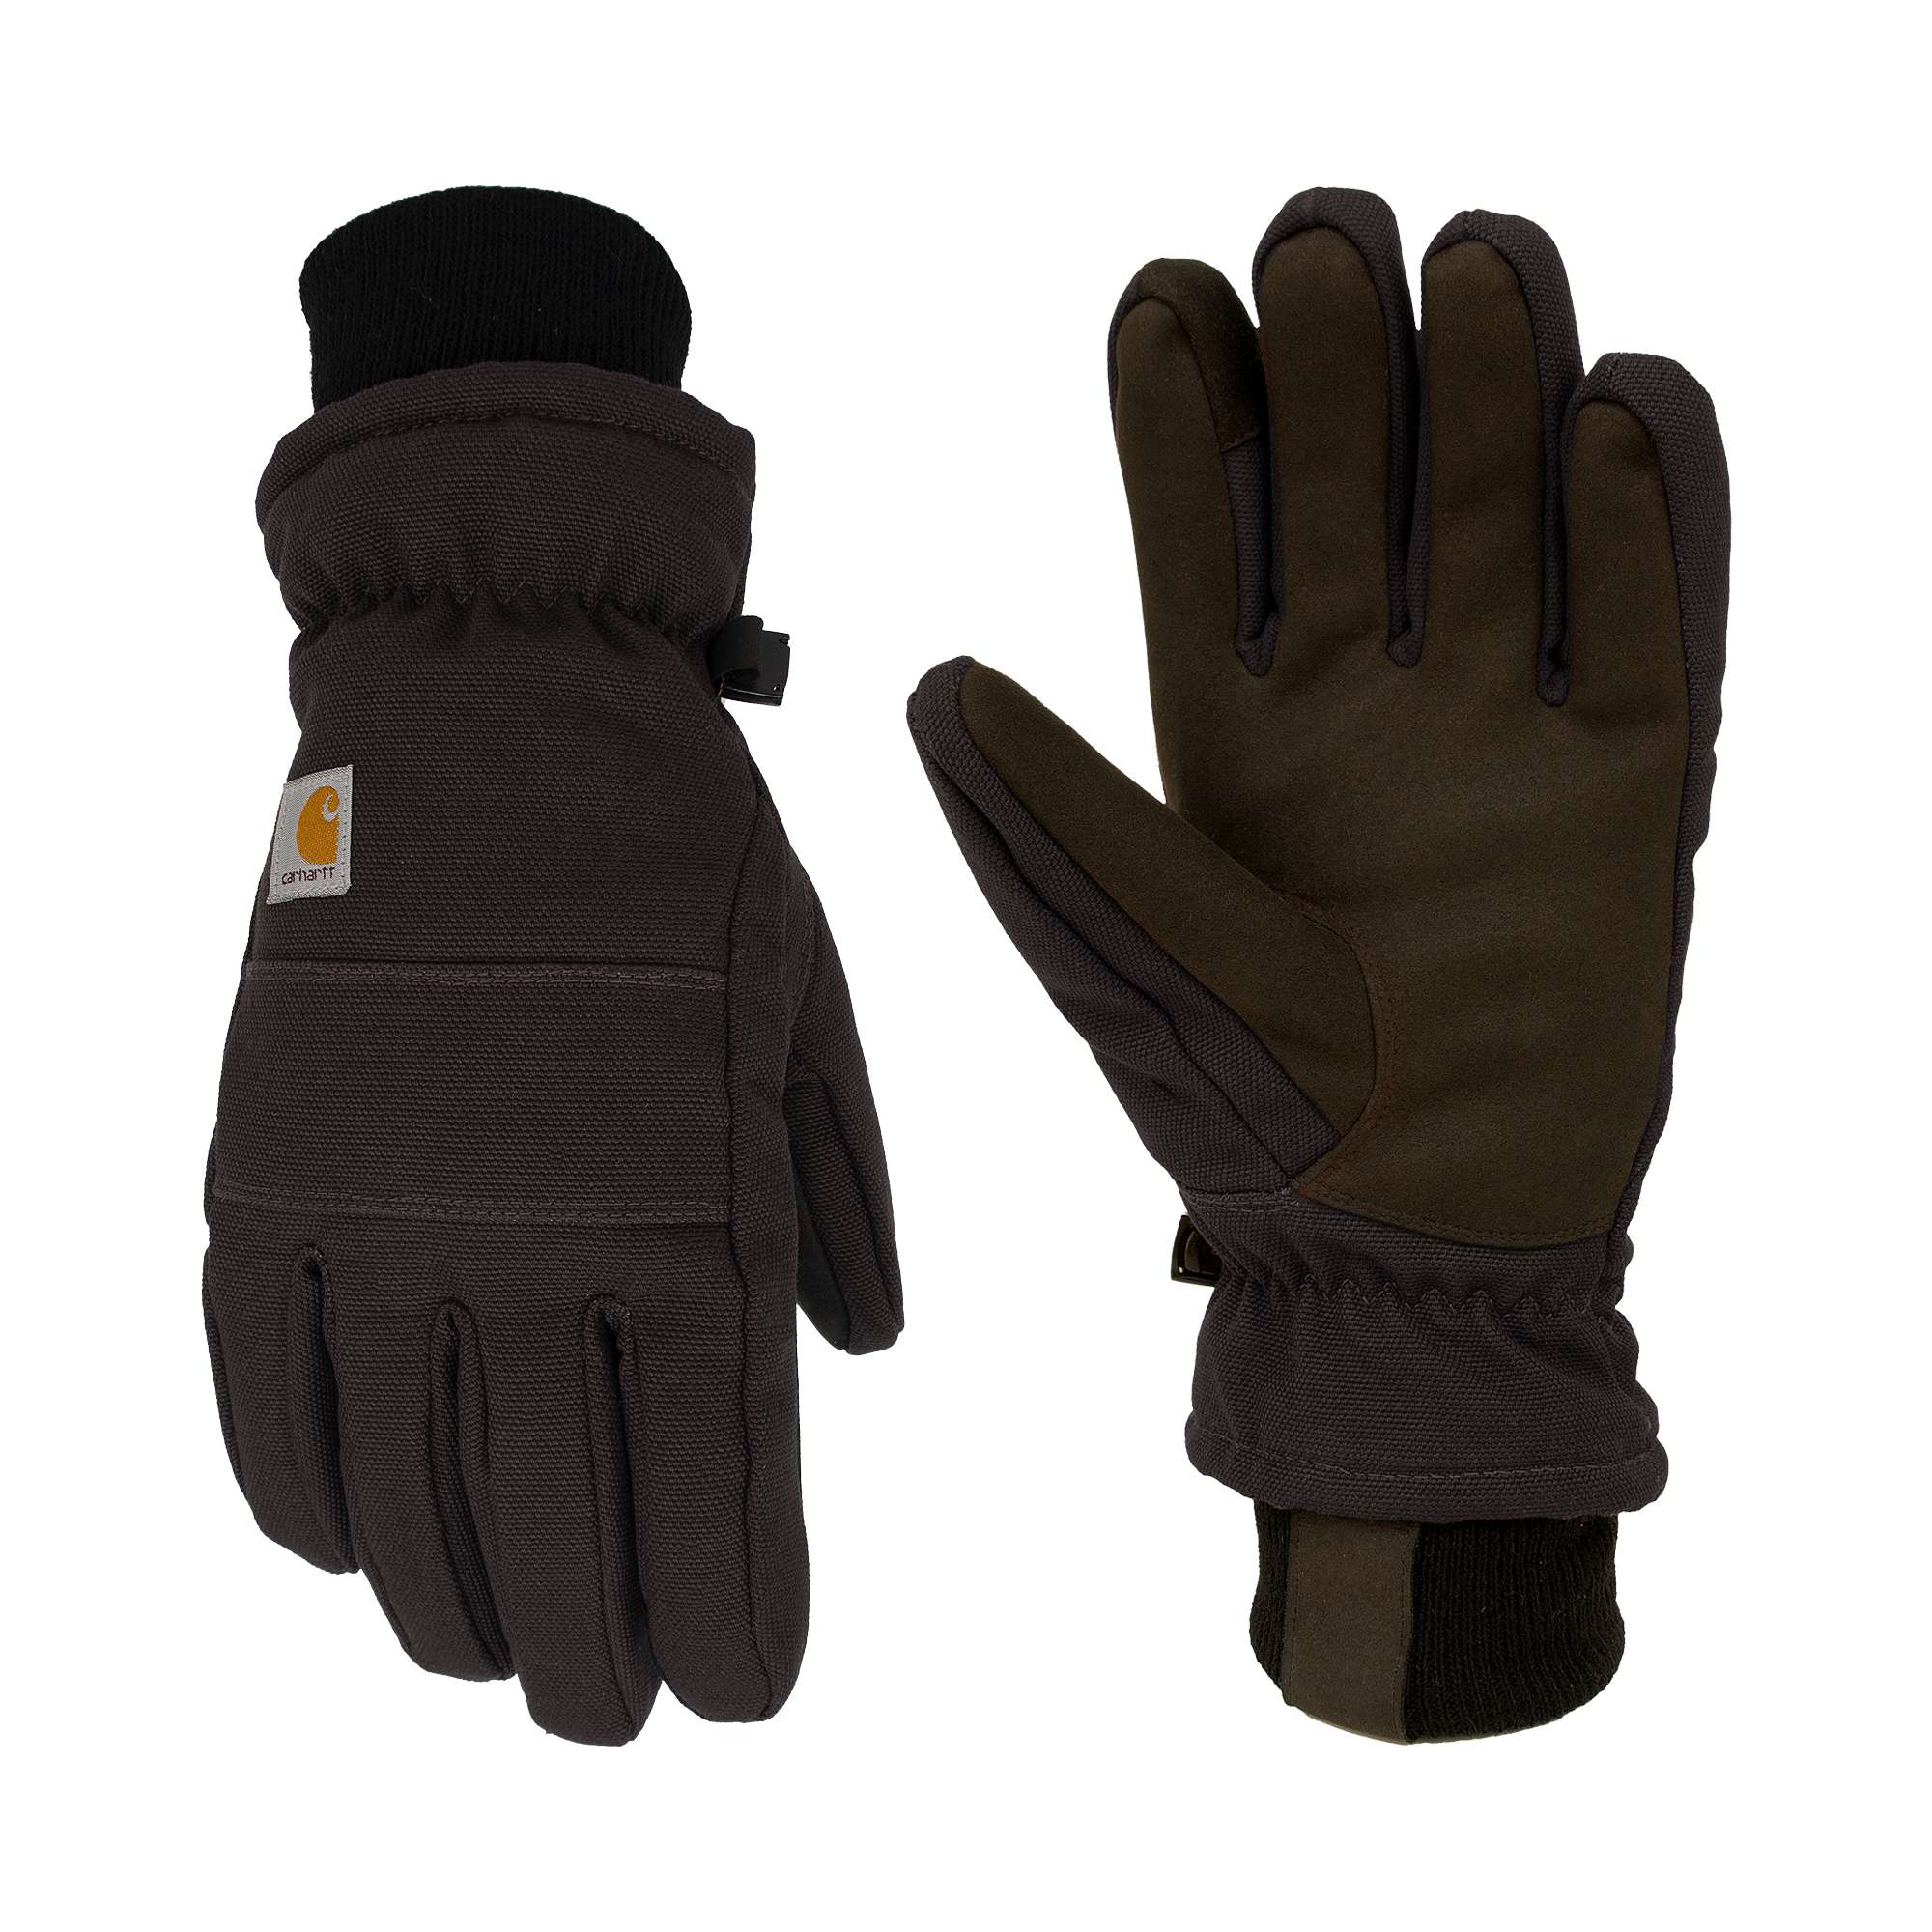 Insulated Duck/Synthetic Leather Knit Cuff Glove